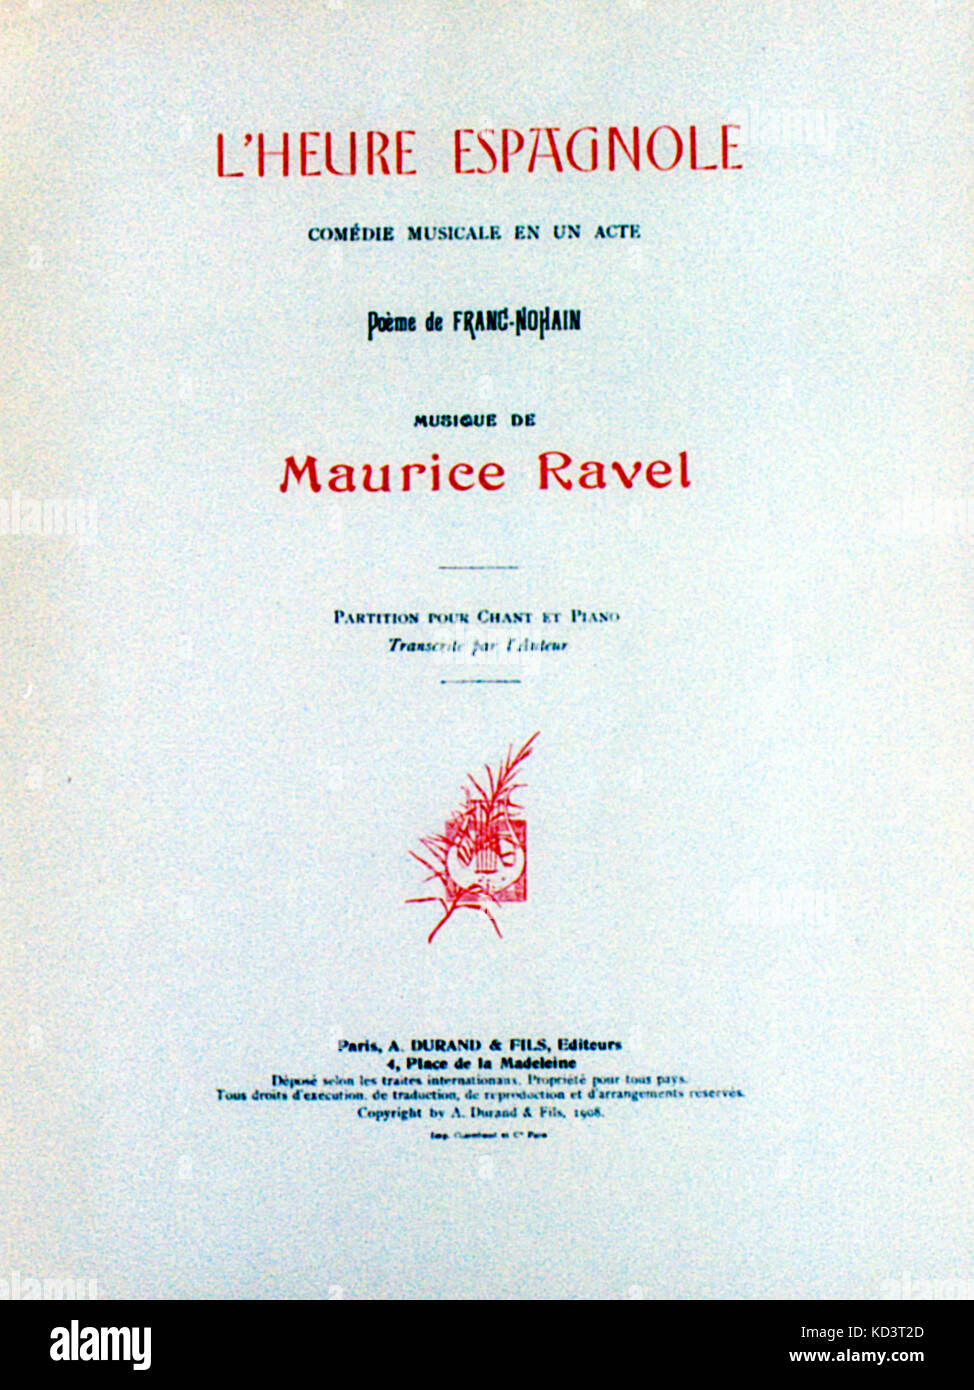 RAVEL, MAURICE - title page of L'Heure Espagnole 1st edition, 2nd issue.  'Comédie musicale en une acte.  Poeme de Franc-Nohain       First written 1911. French composer, 1875-1937 Stock Photo